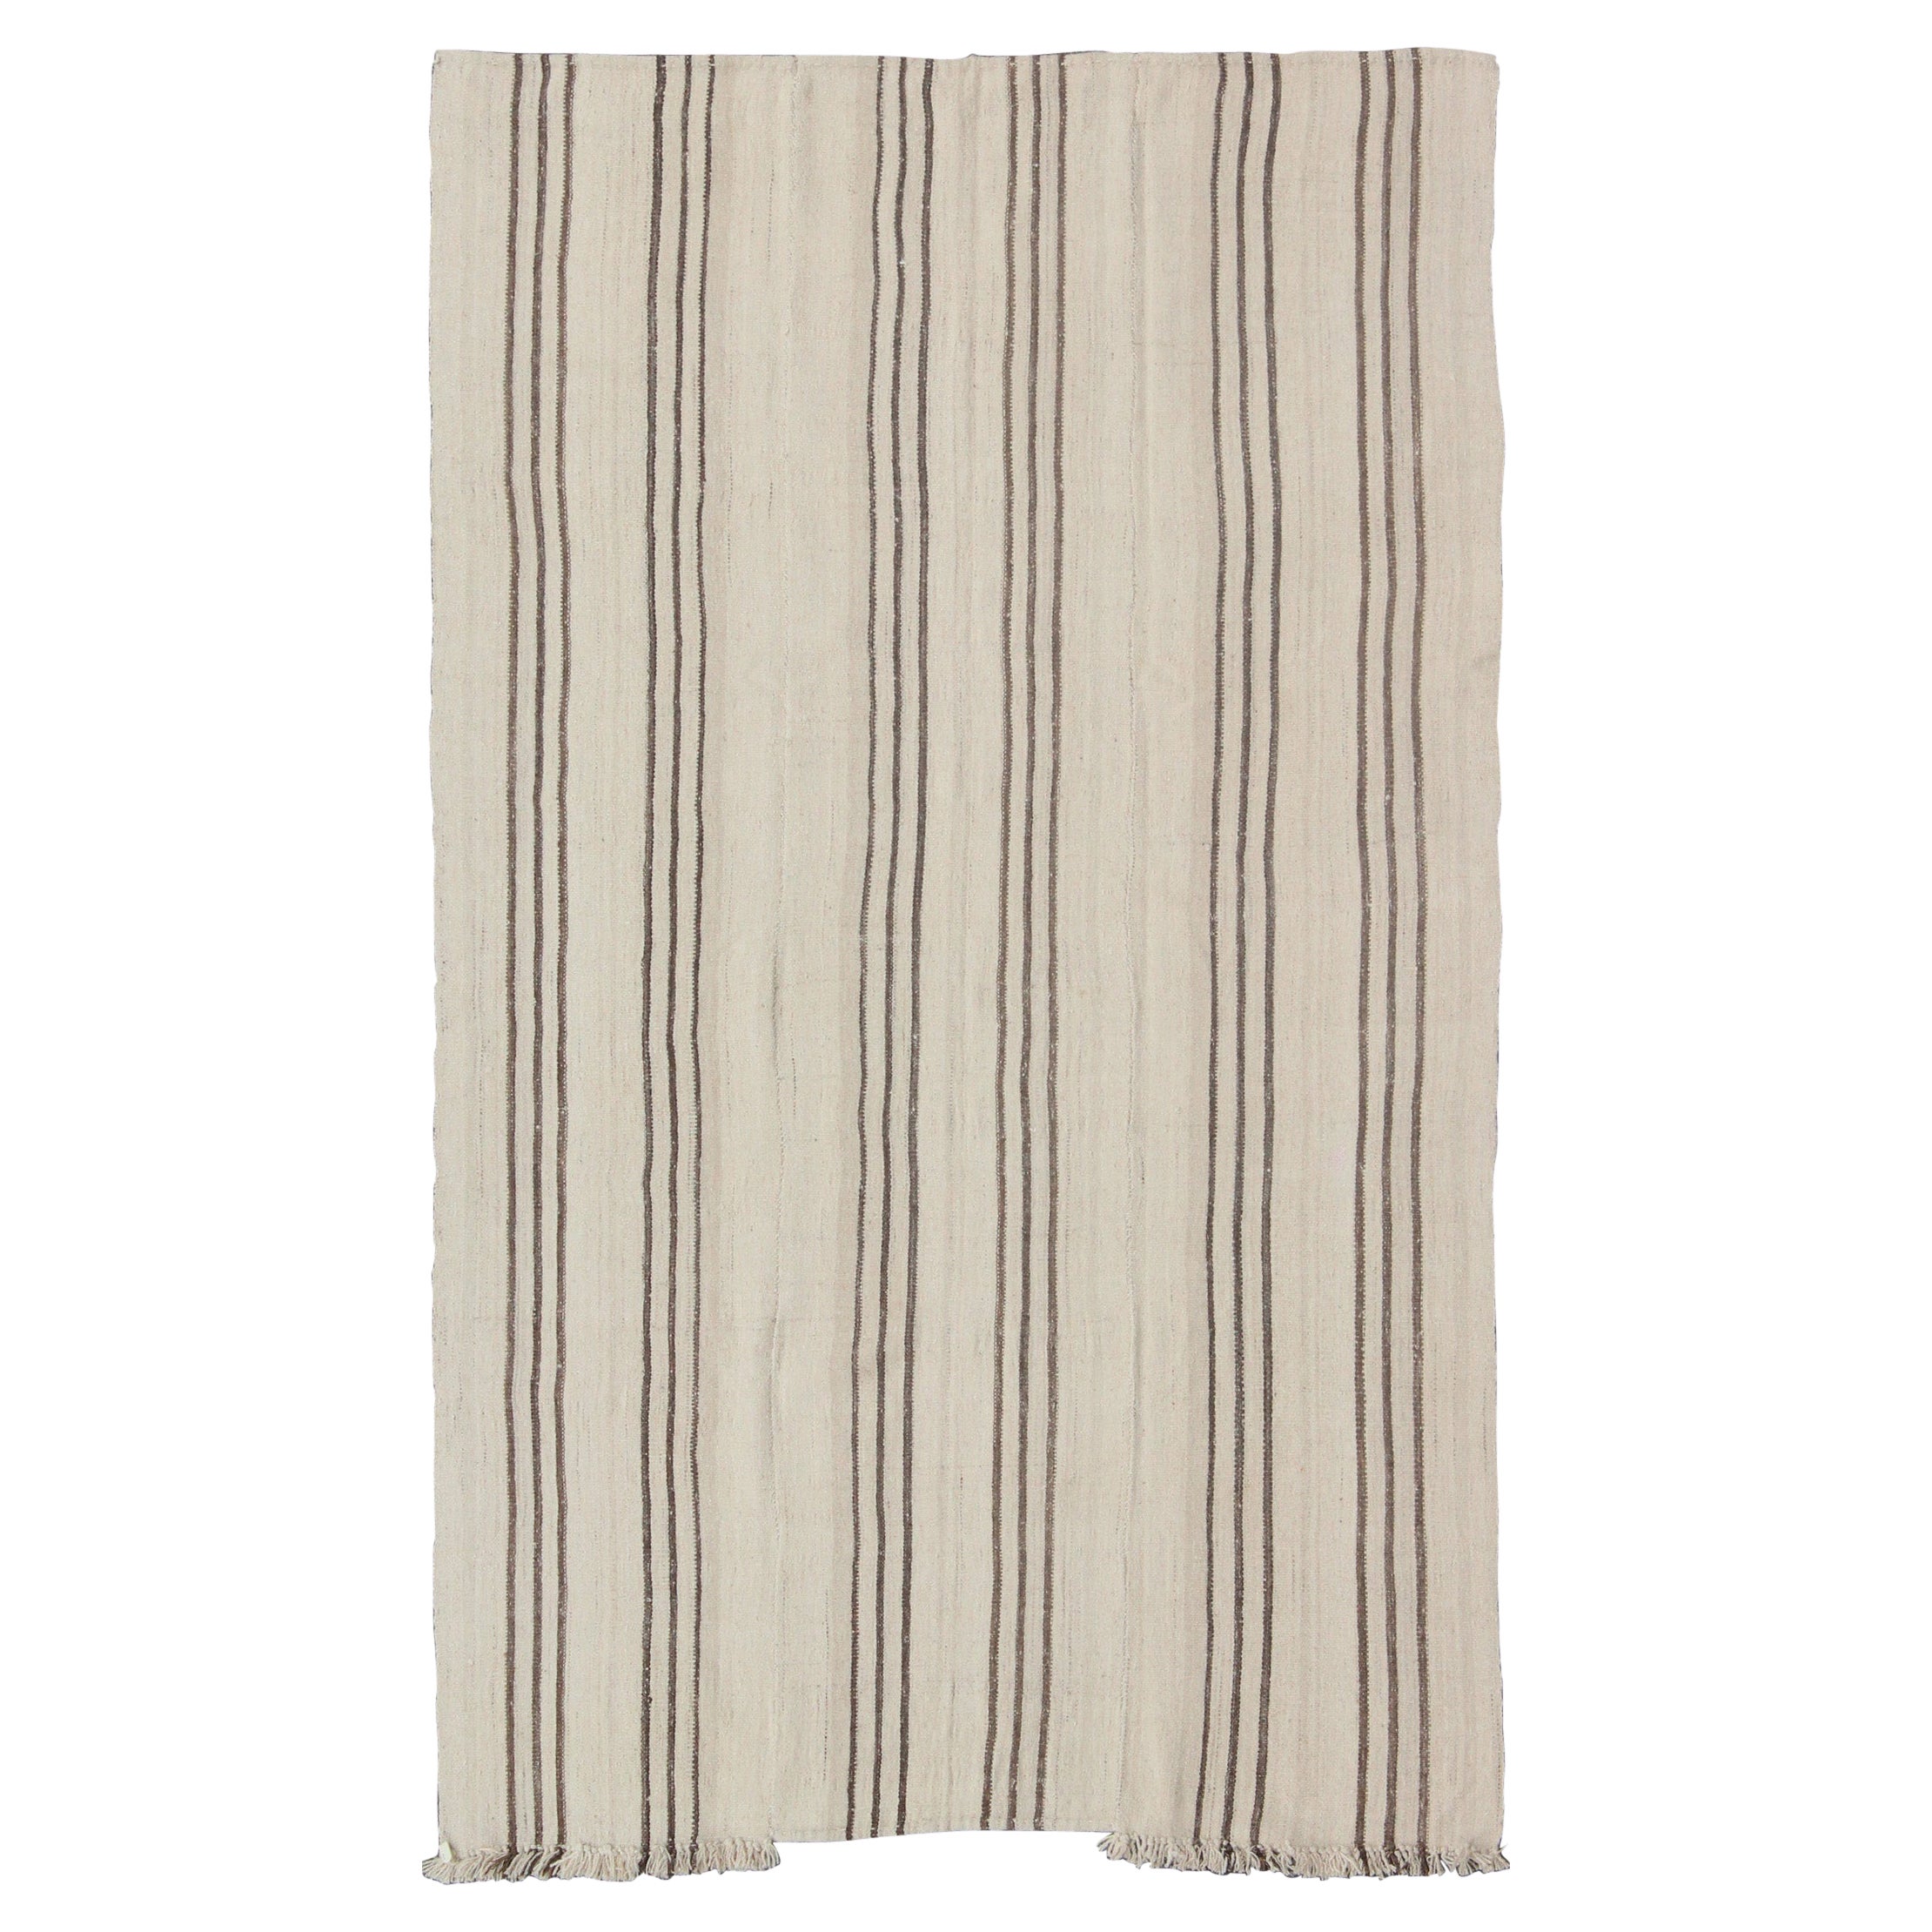 Striped Turkish Vintage Kilim Flat-Weave Rug in Shades of Browns and Ivory